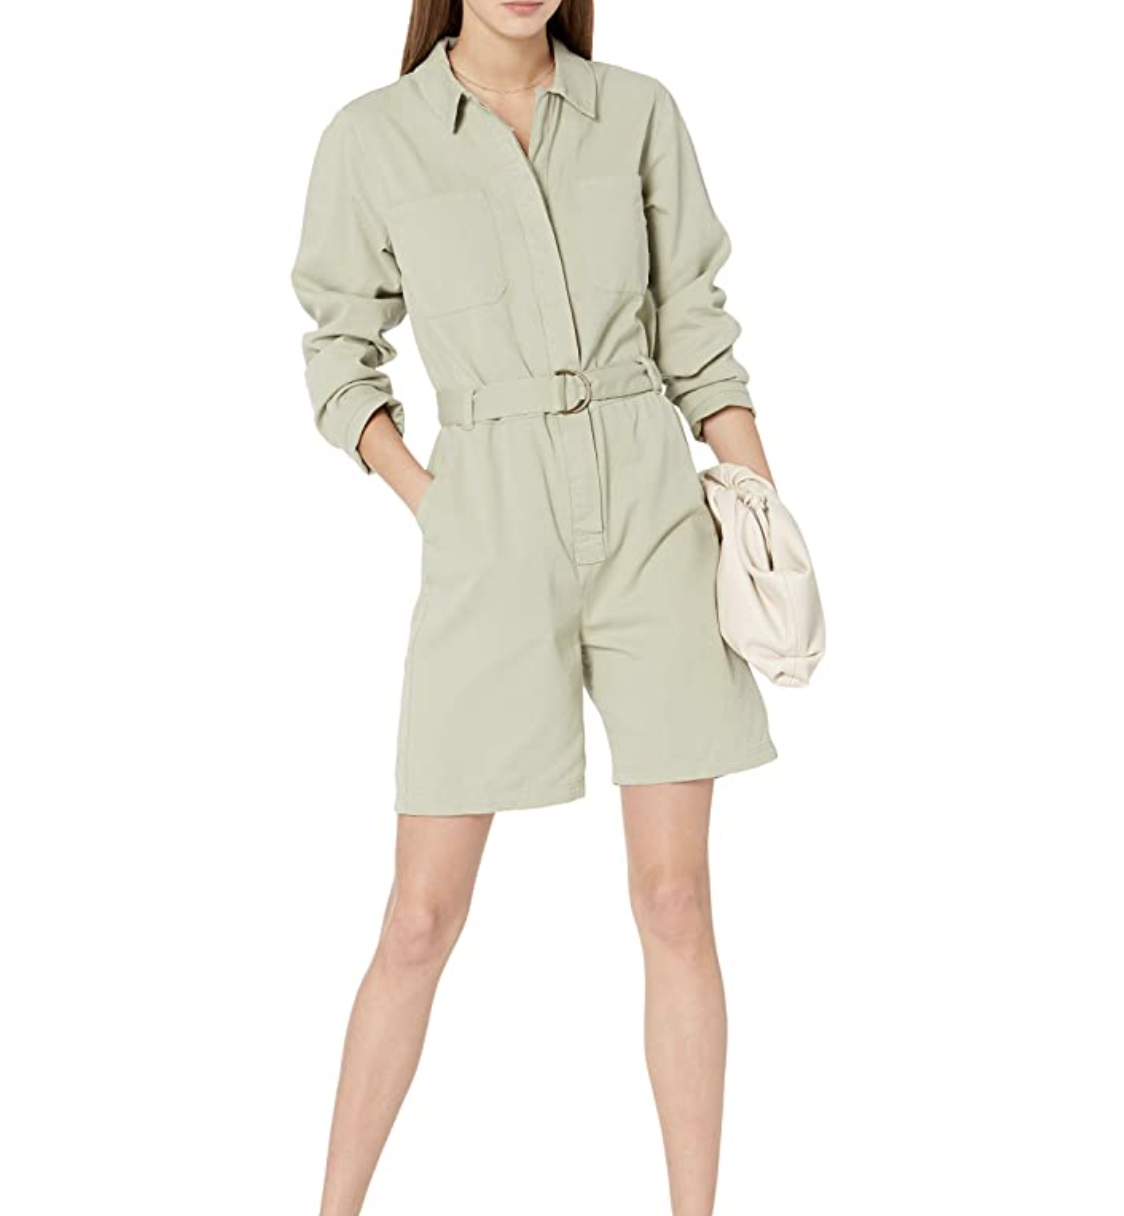 47 Fashion Pieces For Freedom Day If You're Over Loungewear